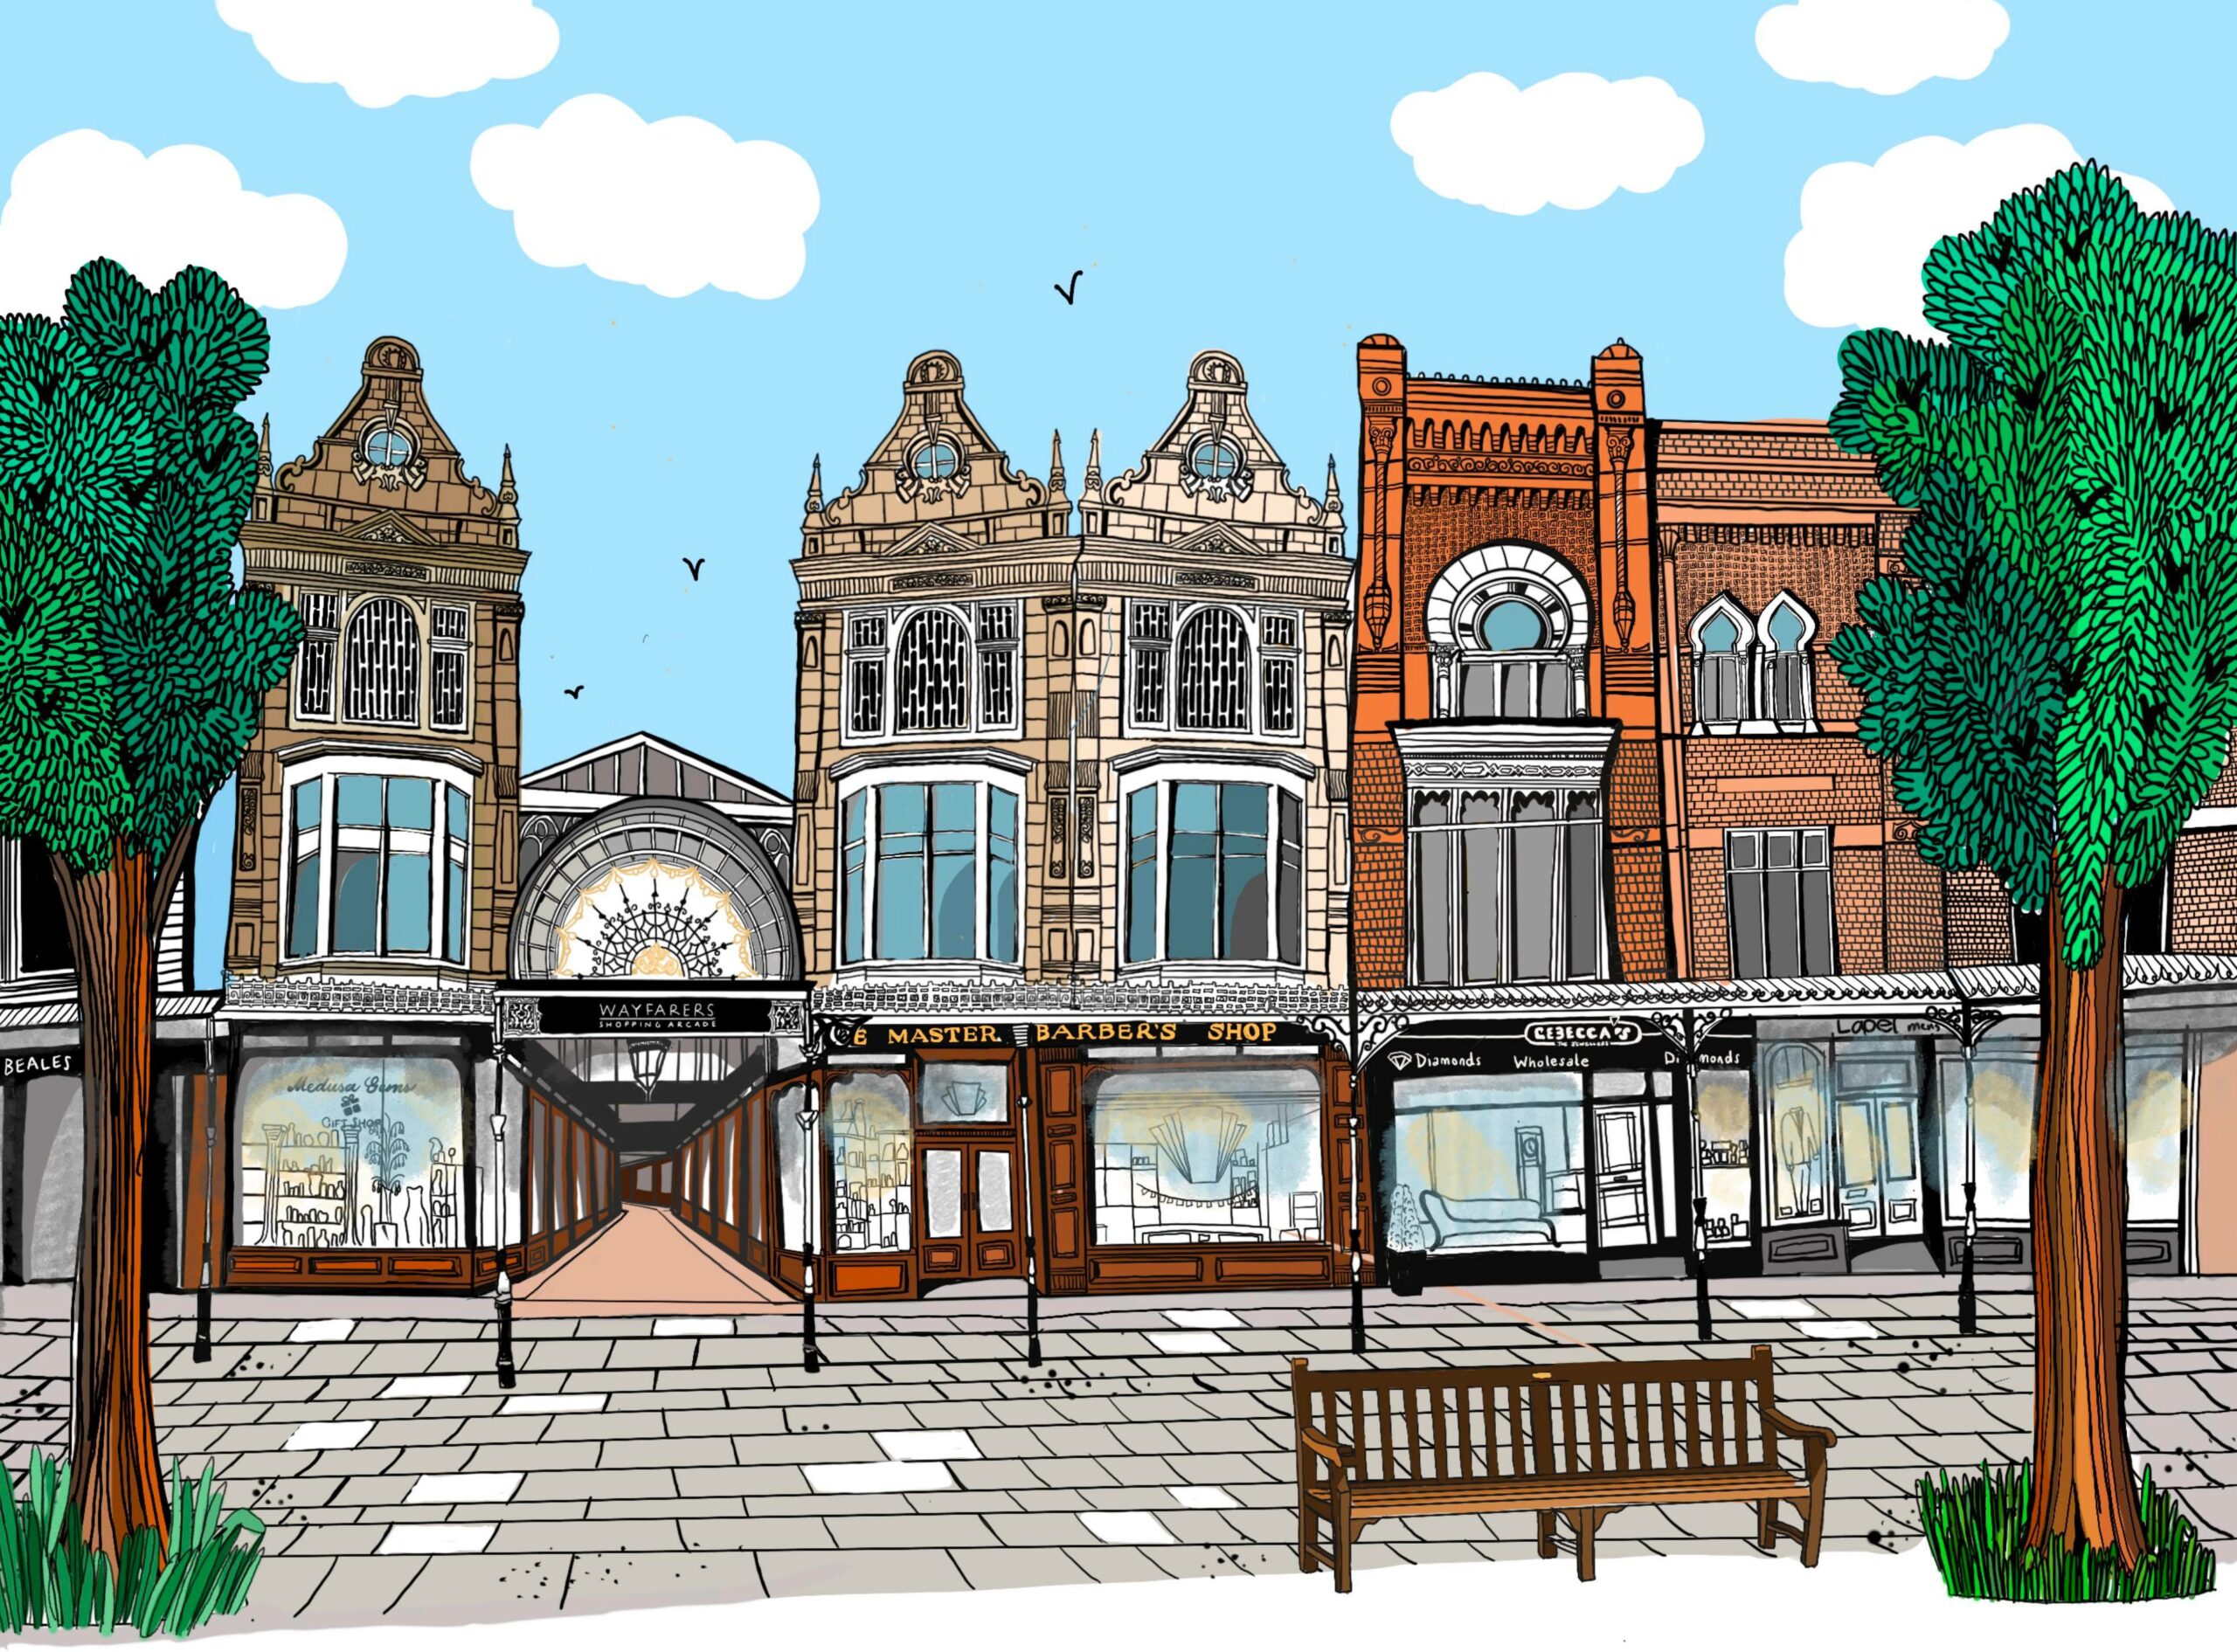 Artist Ruth Spillane is publishing a new book, Southport Illustrated. Wayfarers Arcade in Southport